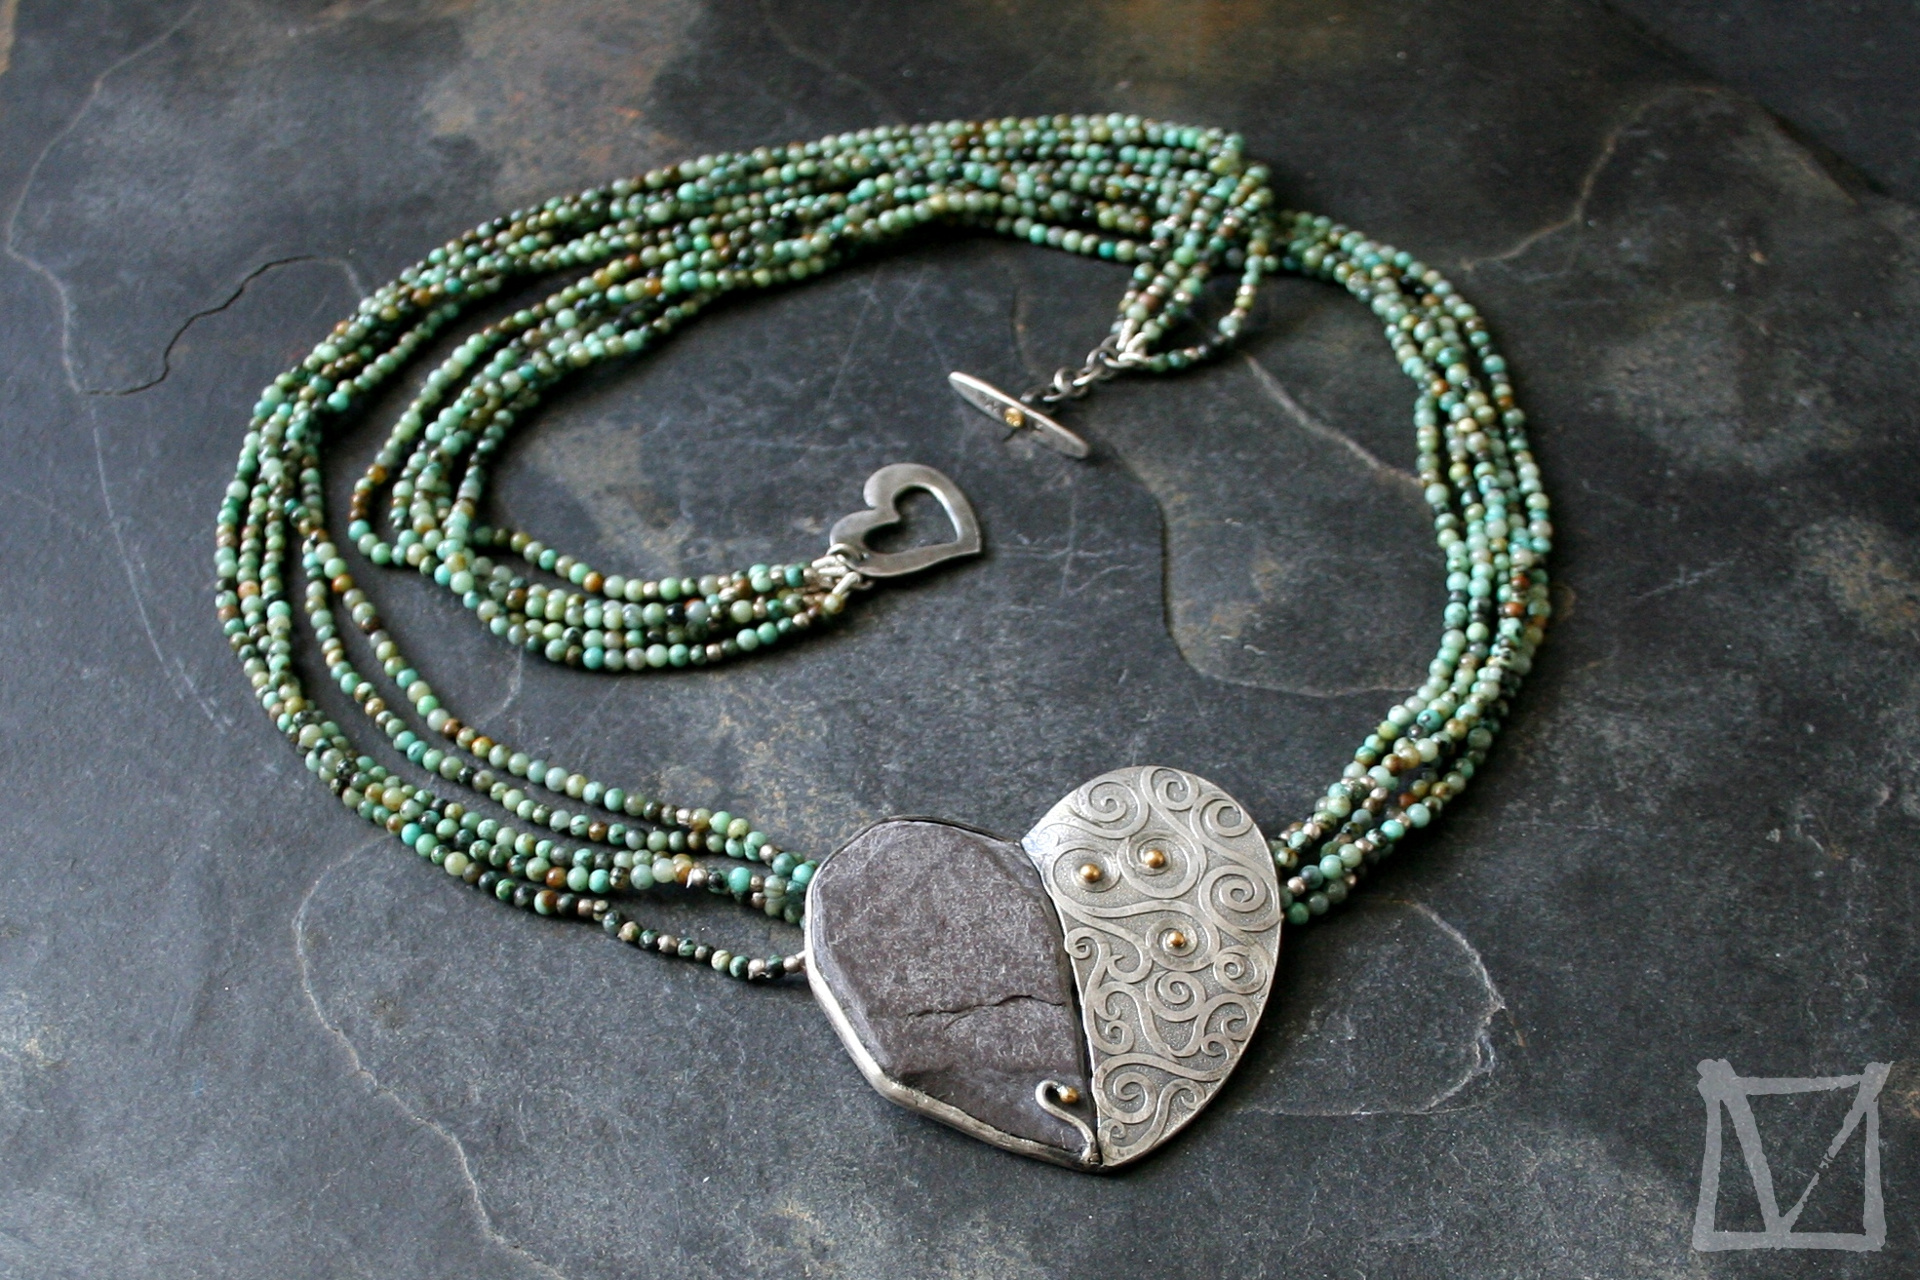 lost love found,necklace, piece of slate found on the beach in the shape of half of a heart, sterling silver, fine silver,22ct gold, turquoise beads